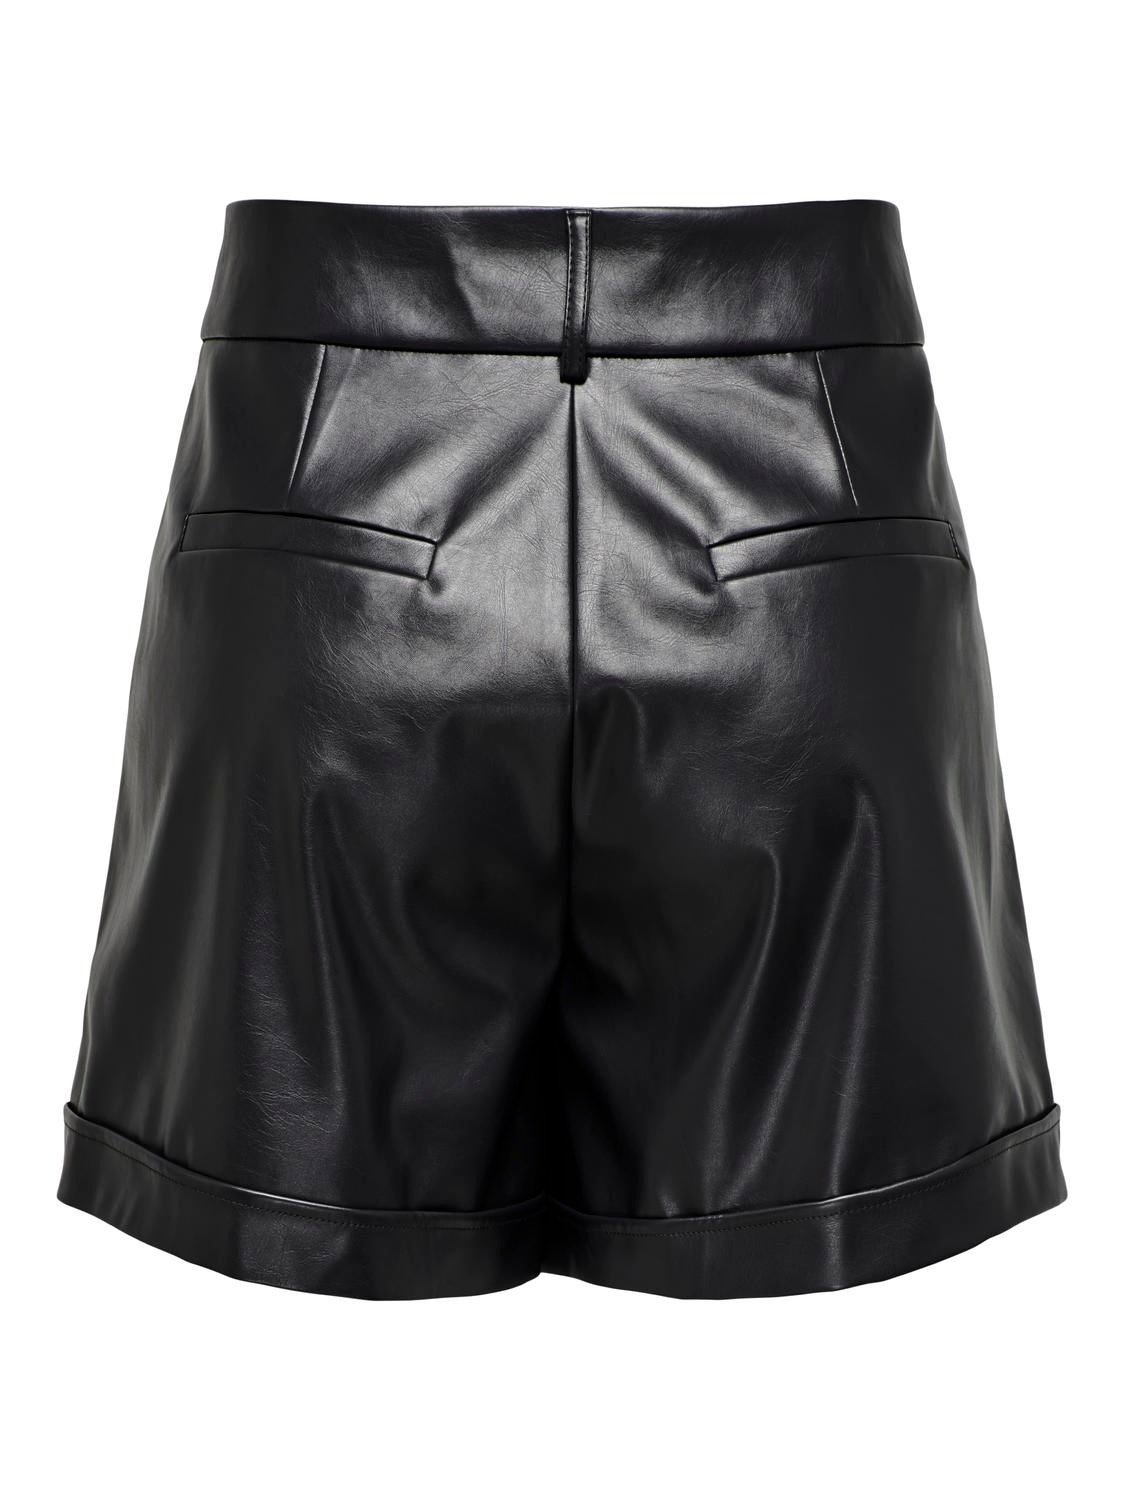 ADRIANA LACE UP FAUX LEATHER SHORTS in black